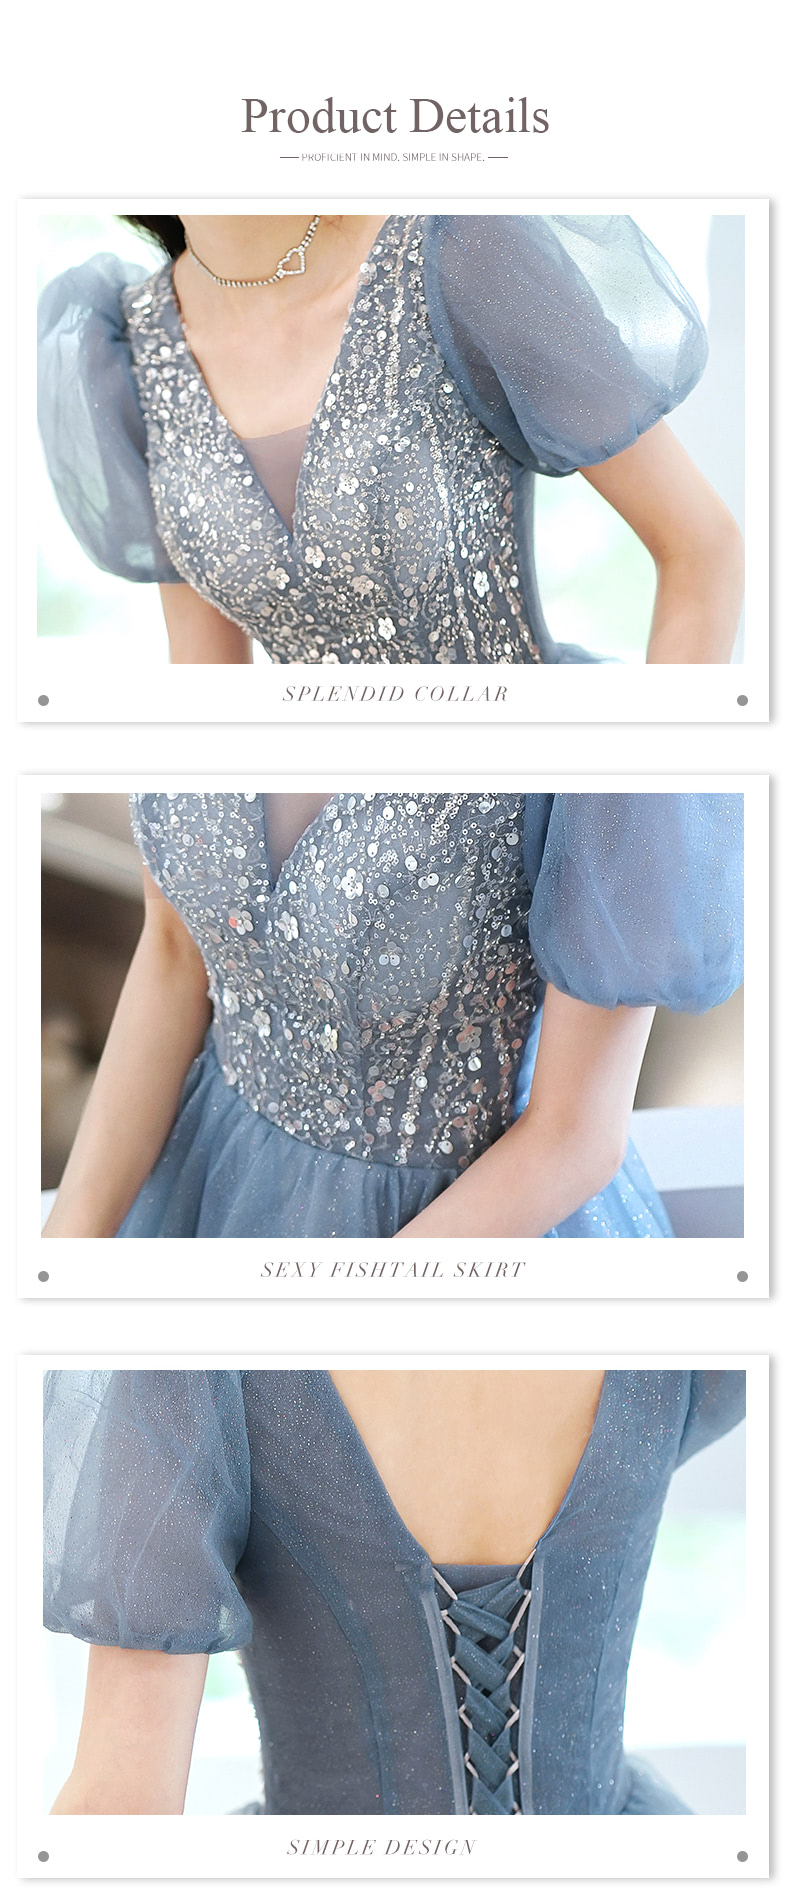 A-Line-Blue-Tulle-Short-Sleeve-Prom-Party-Formal-Evening-Dress18.jpg